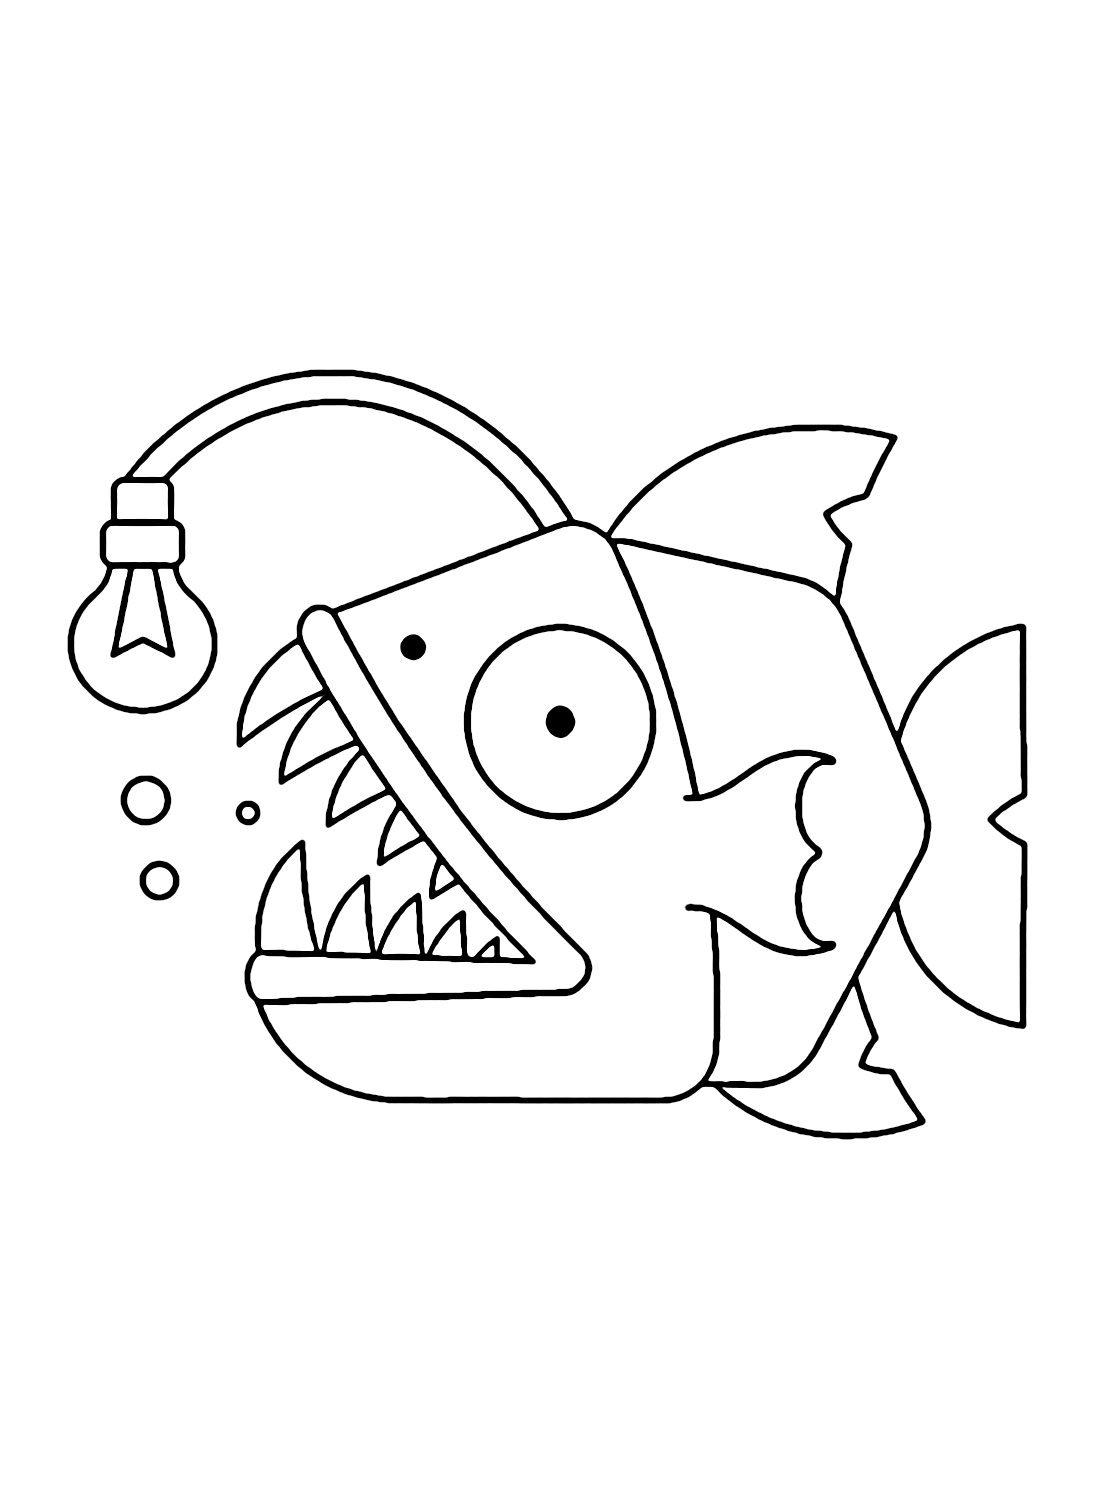 Anglerfish Images Coloring Page